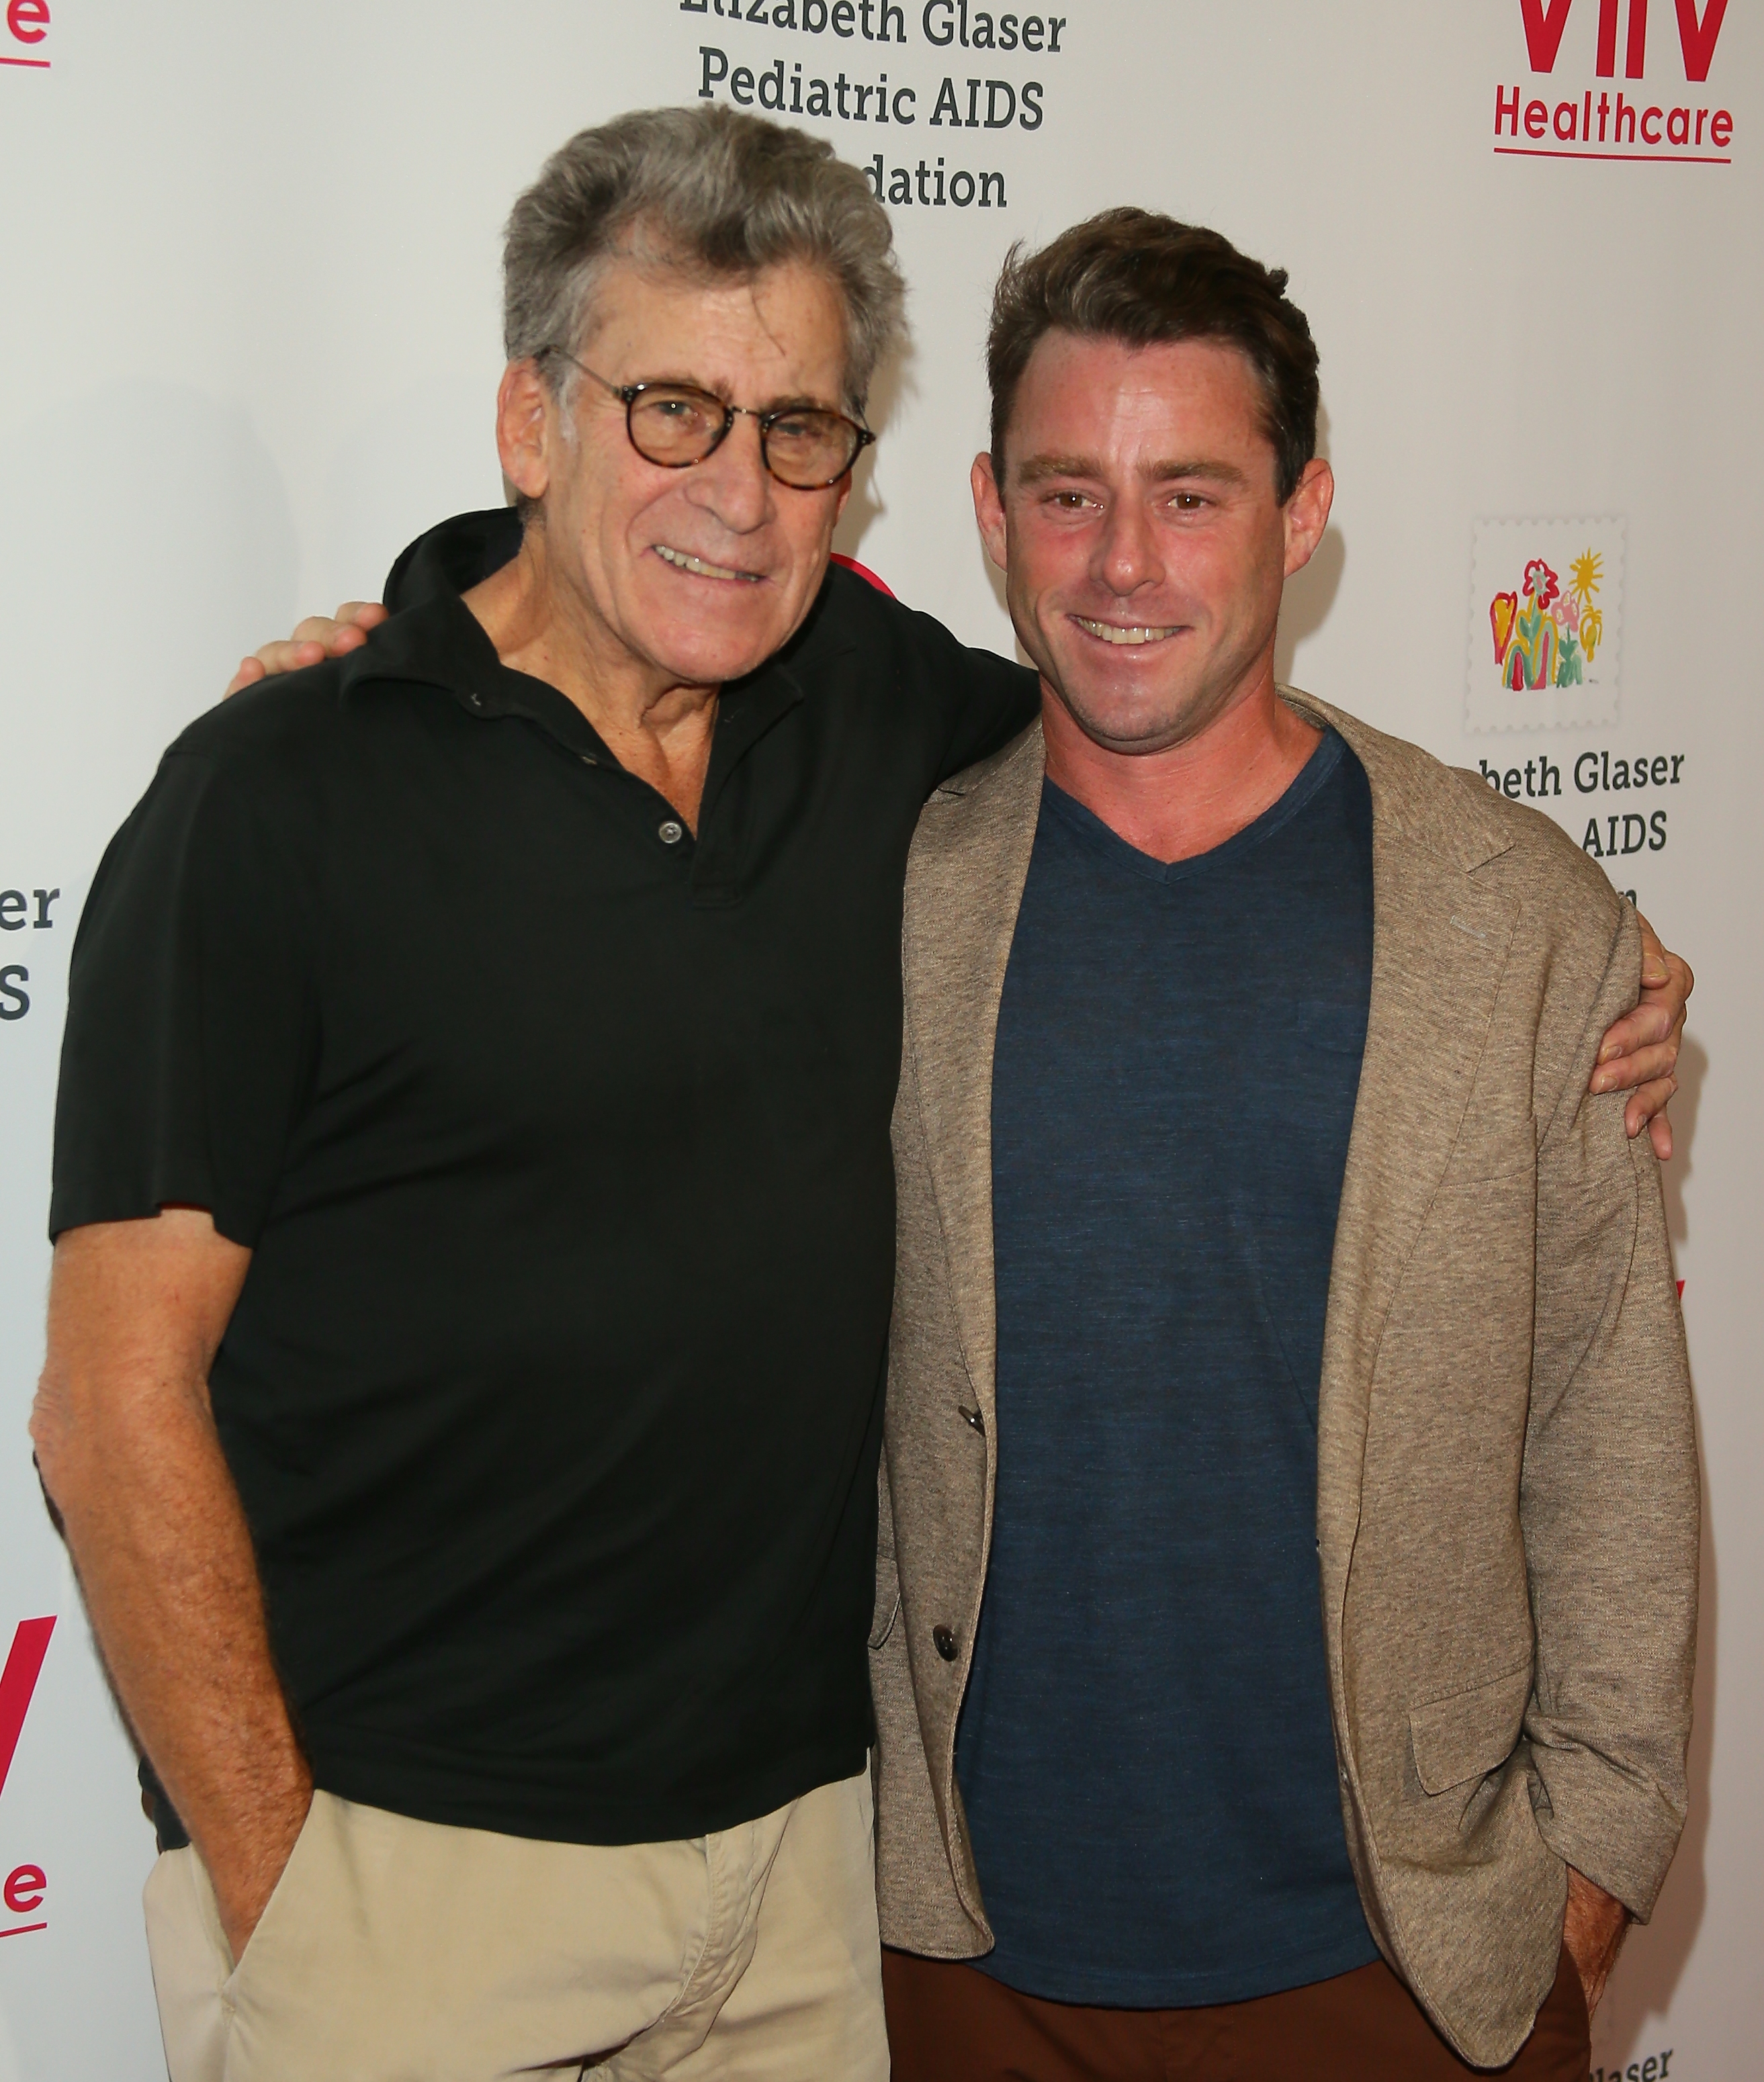 Paul Michael Glaser and Jake Glaser attend the Elizabeth Glaser Pediatric AIDS Foundation's 30th Annual A Time for Heroes Family Festival at Smashbox Studios on October 27, 2019, in Culver City, California. | Source: Getty Images